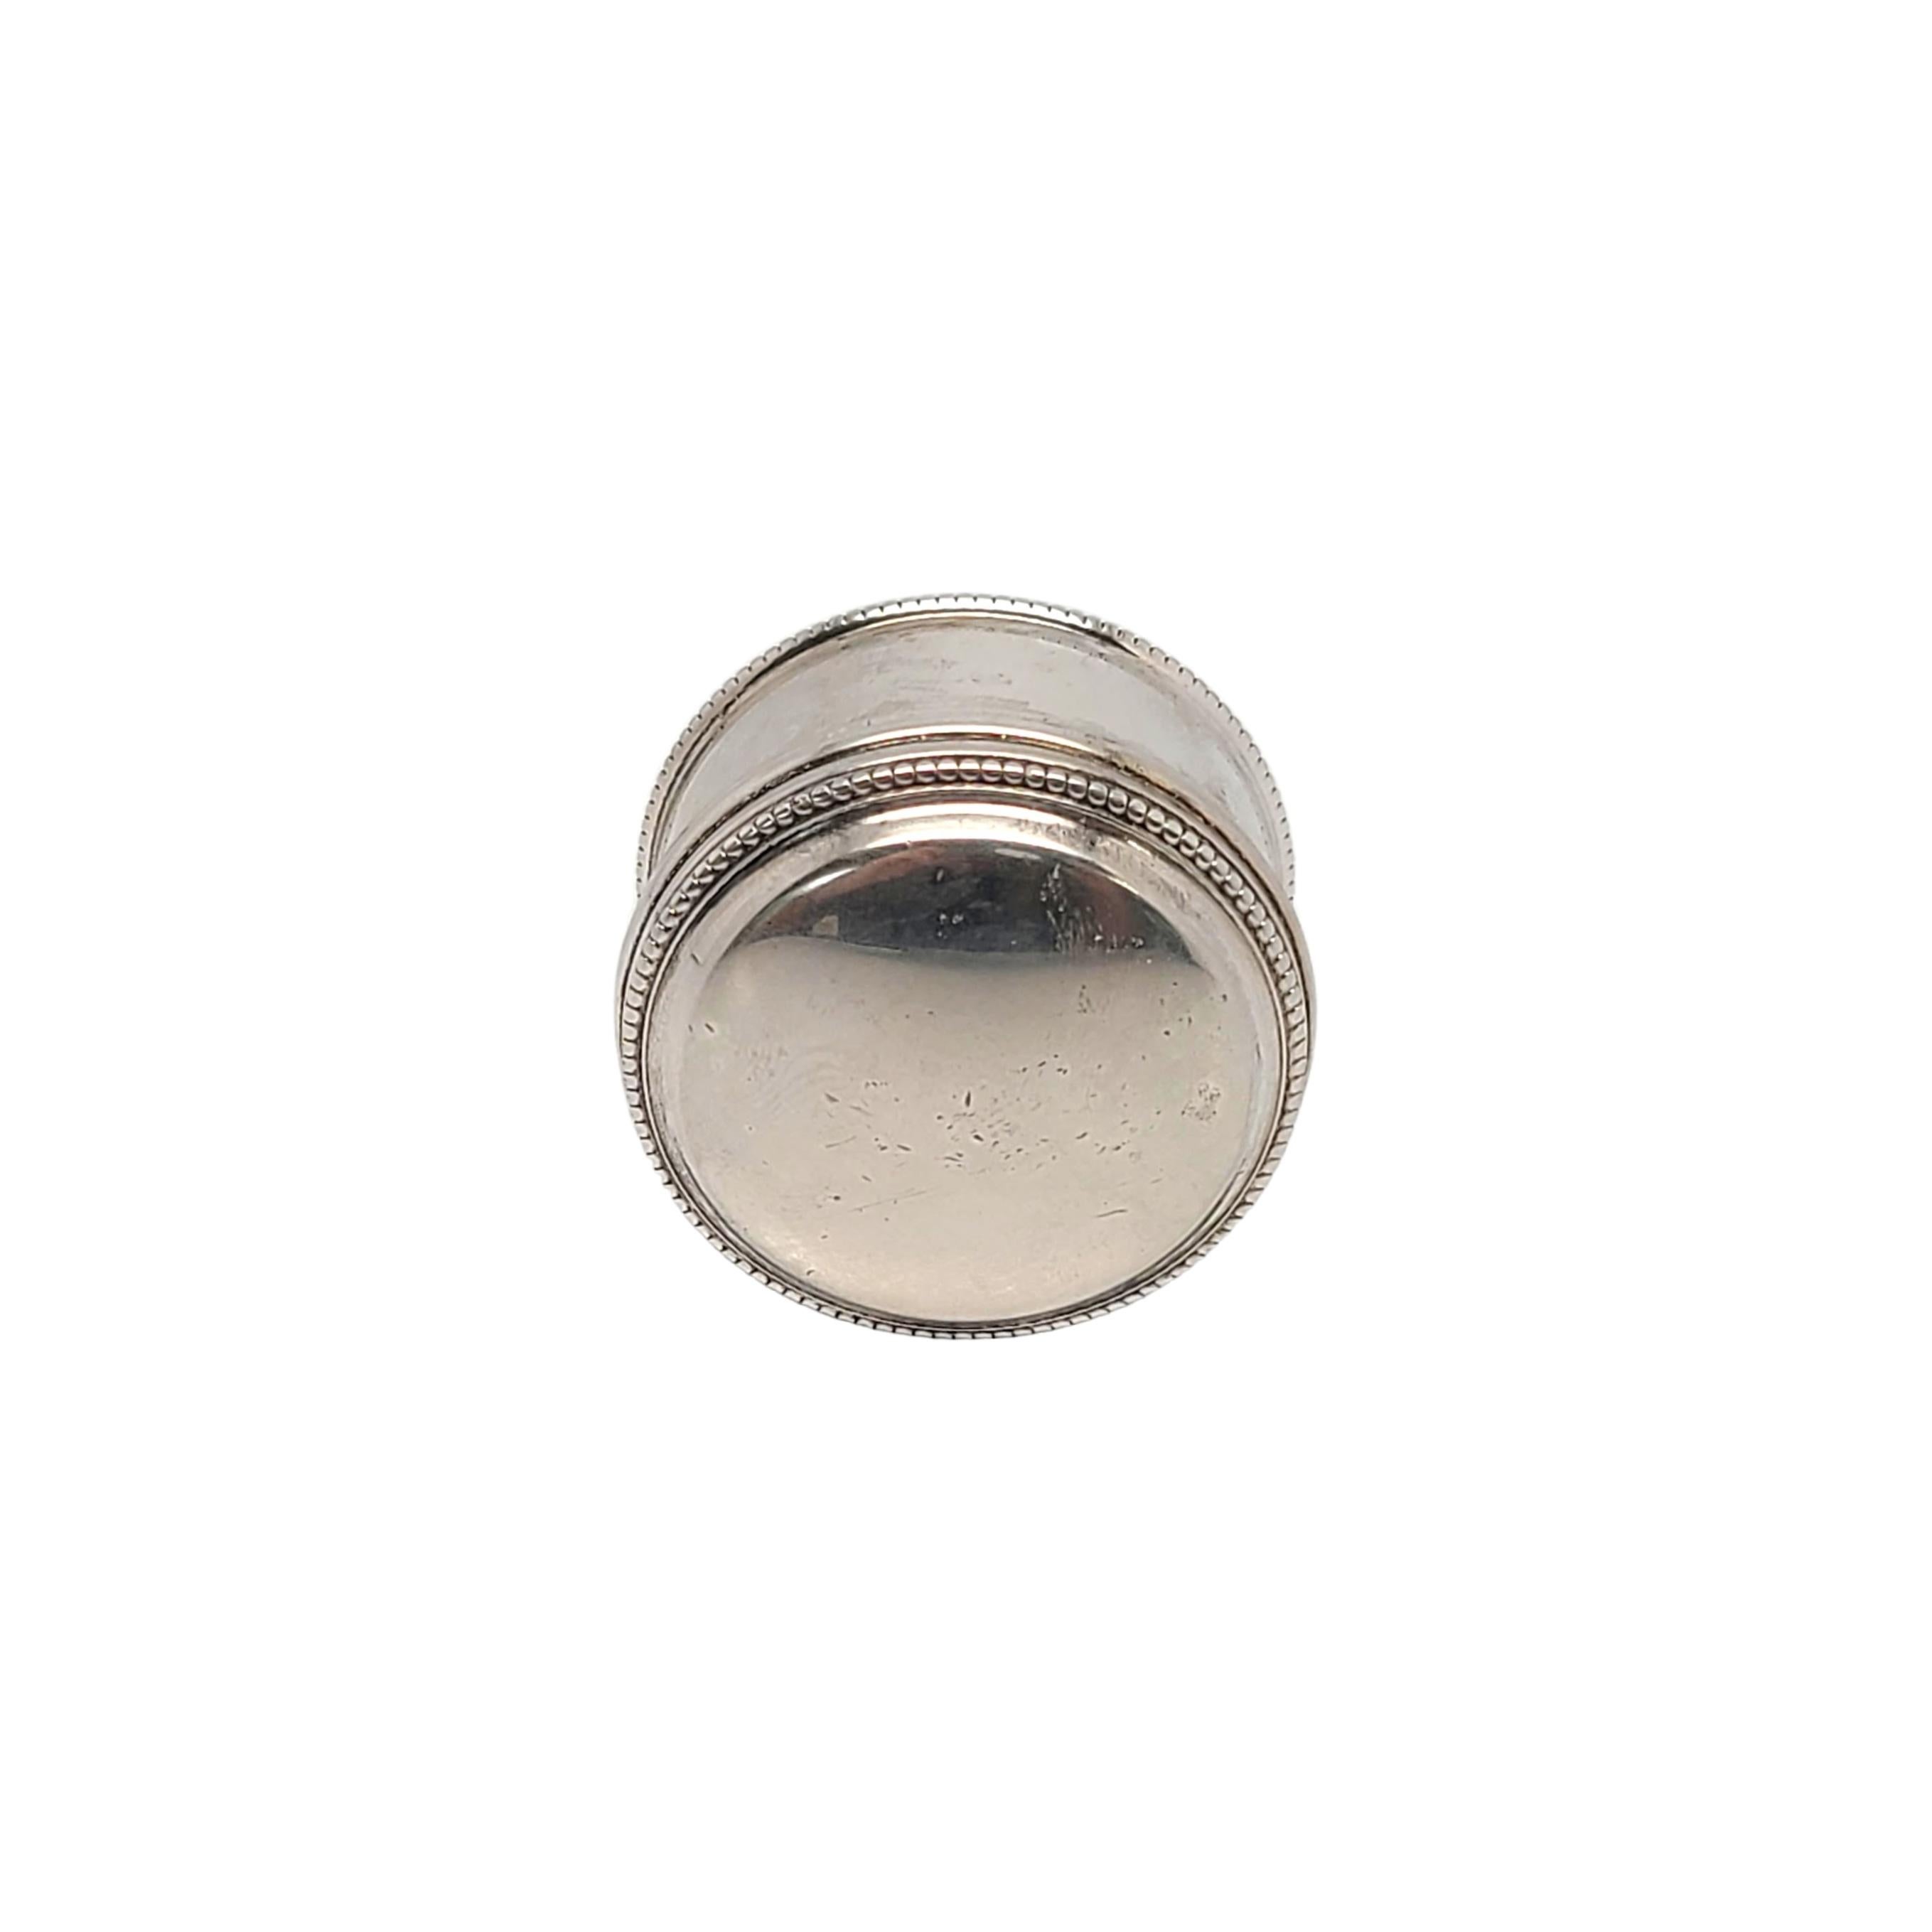 English Sterling Silver Round Pill Box 1